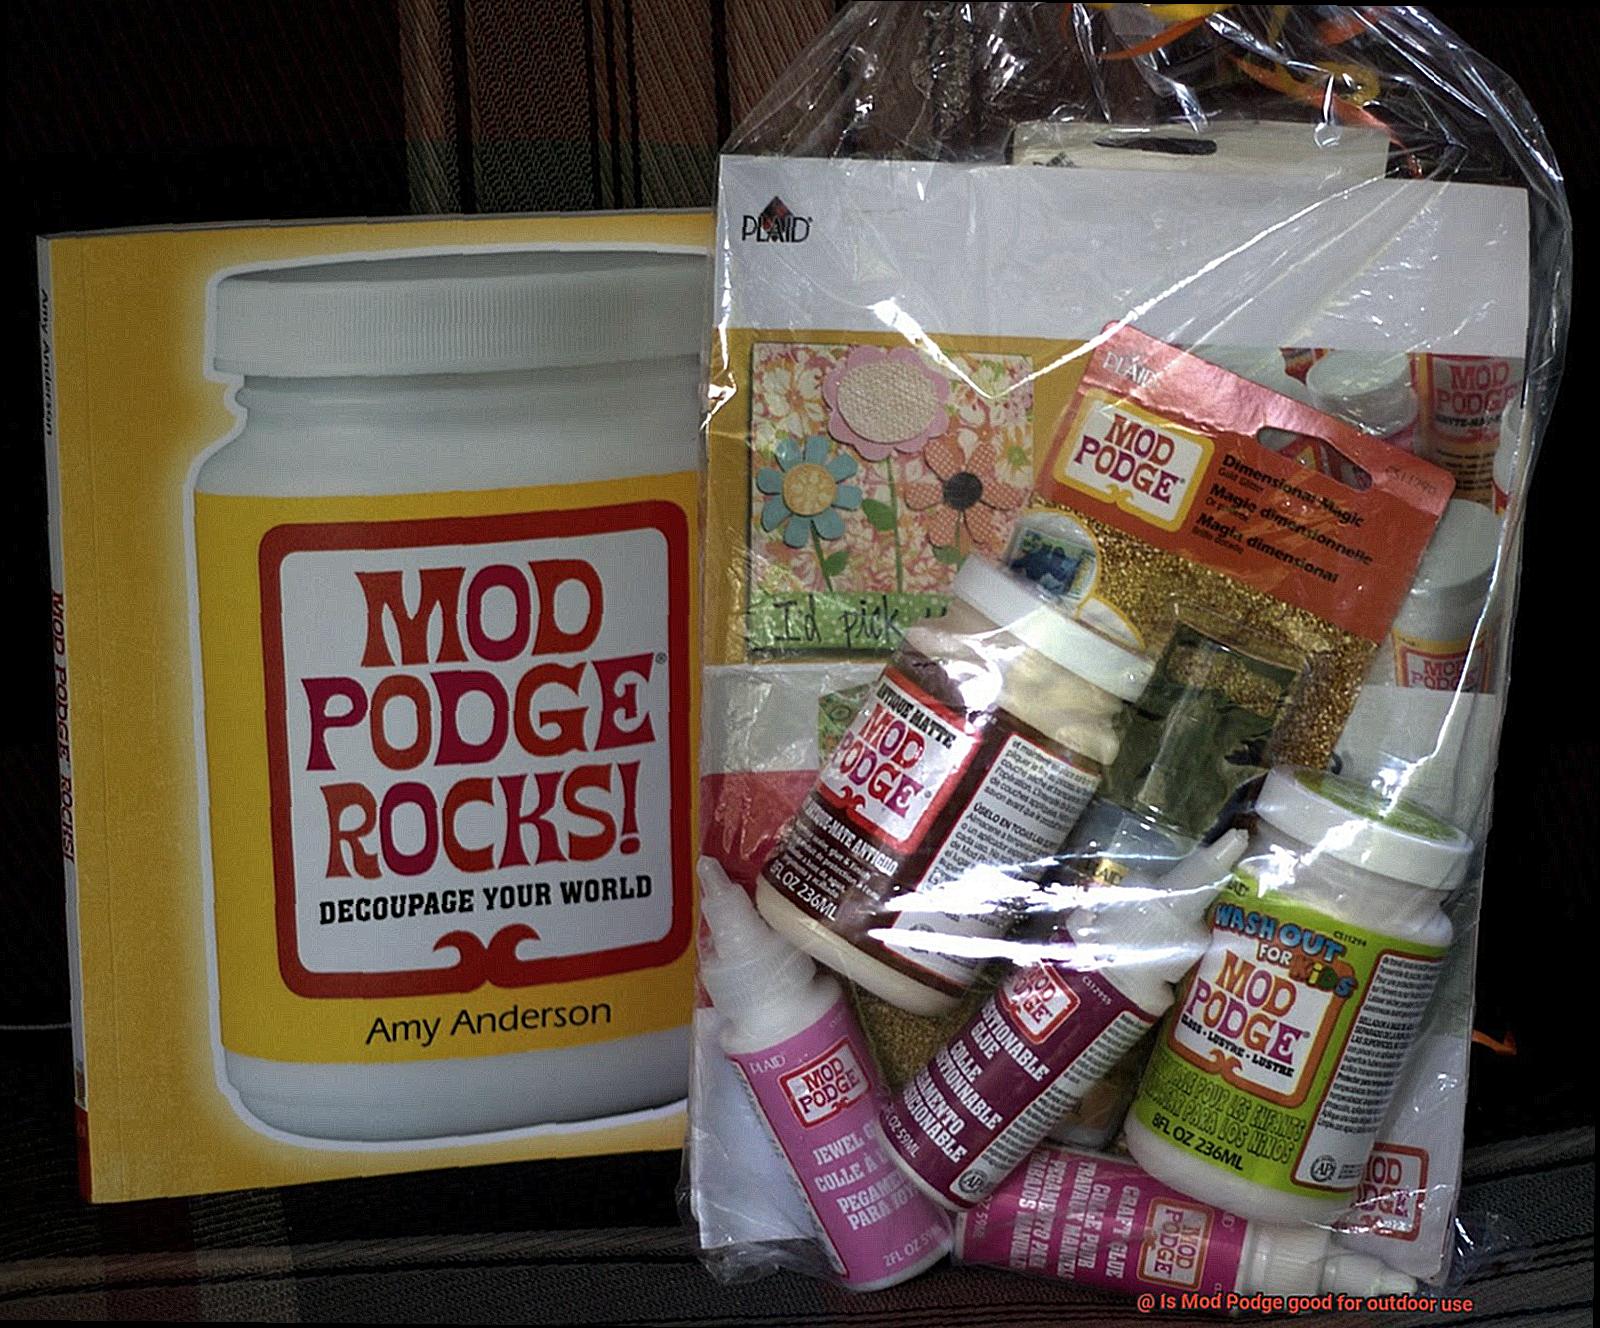 Is Mod Podge good for outdoor use-2